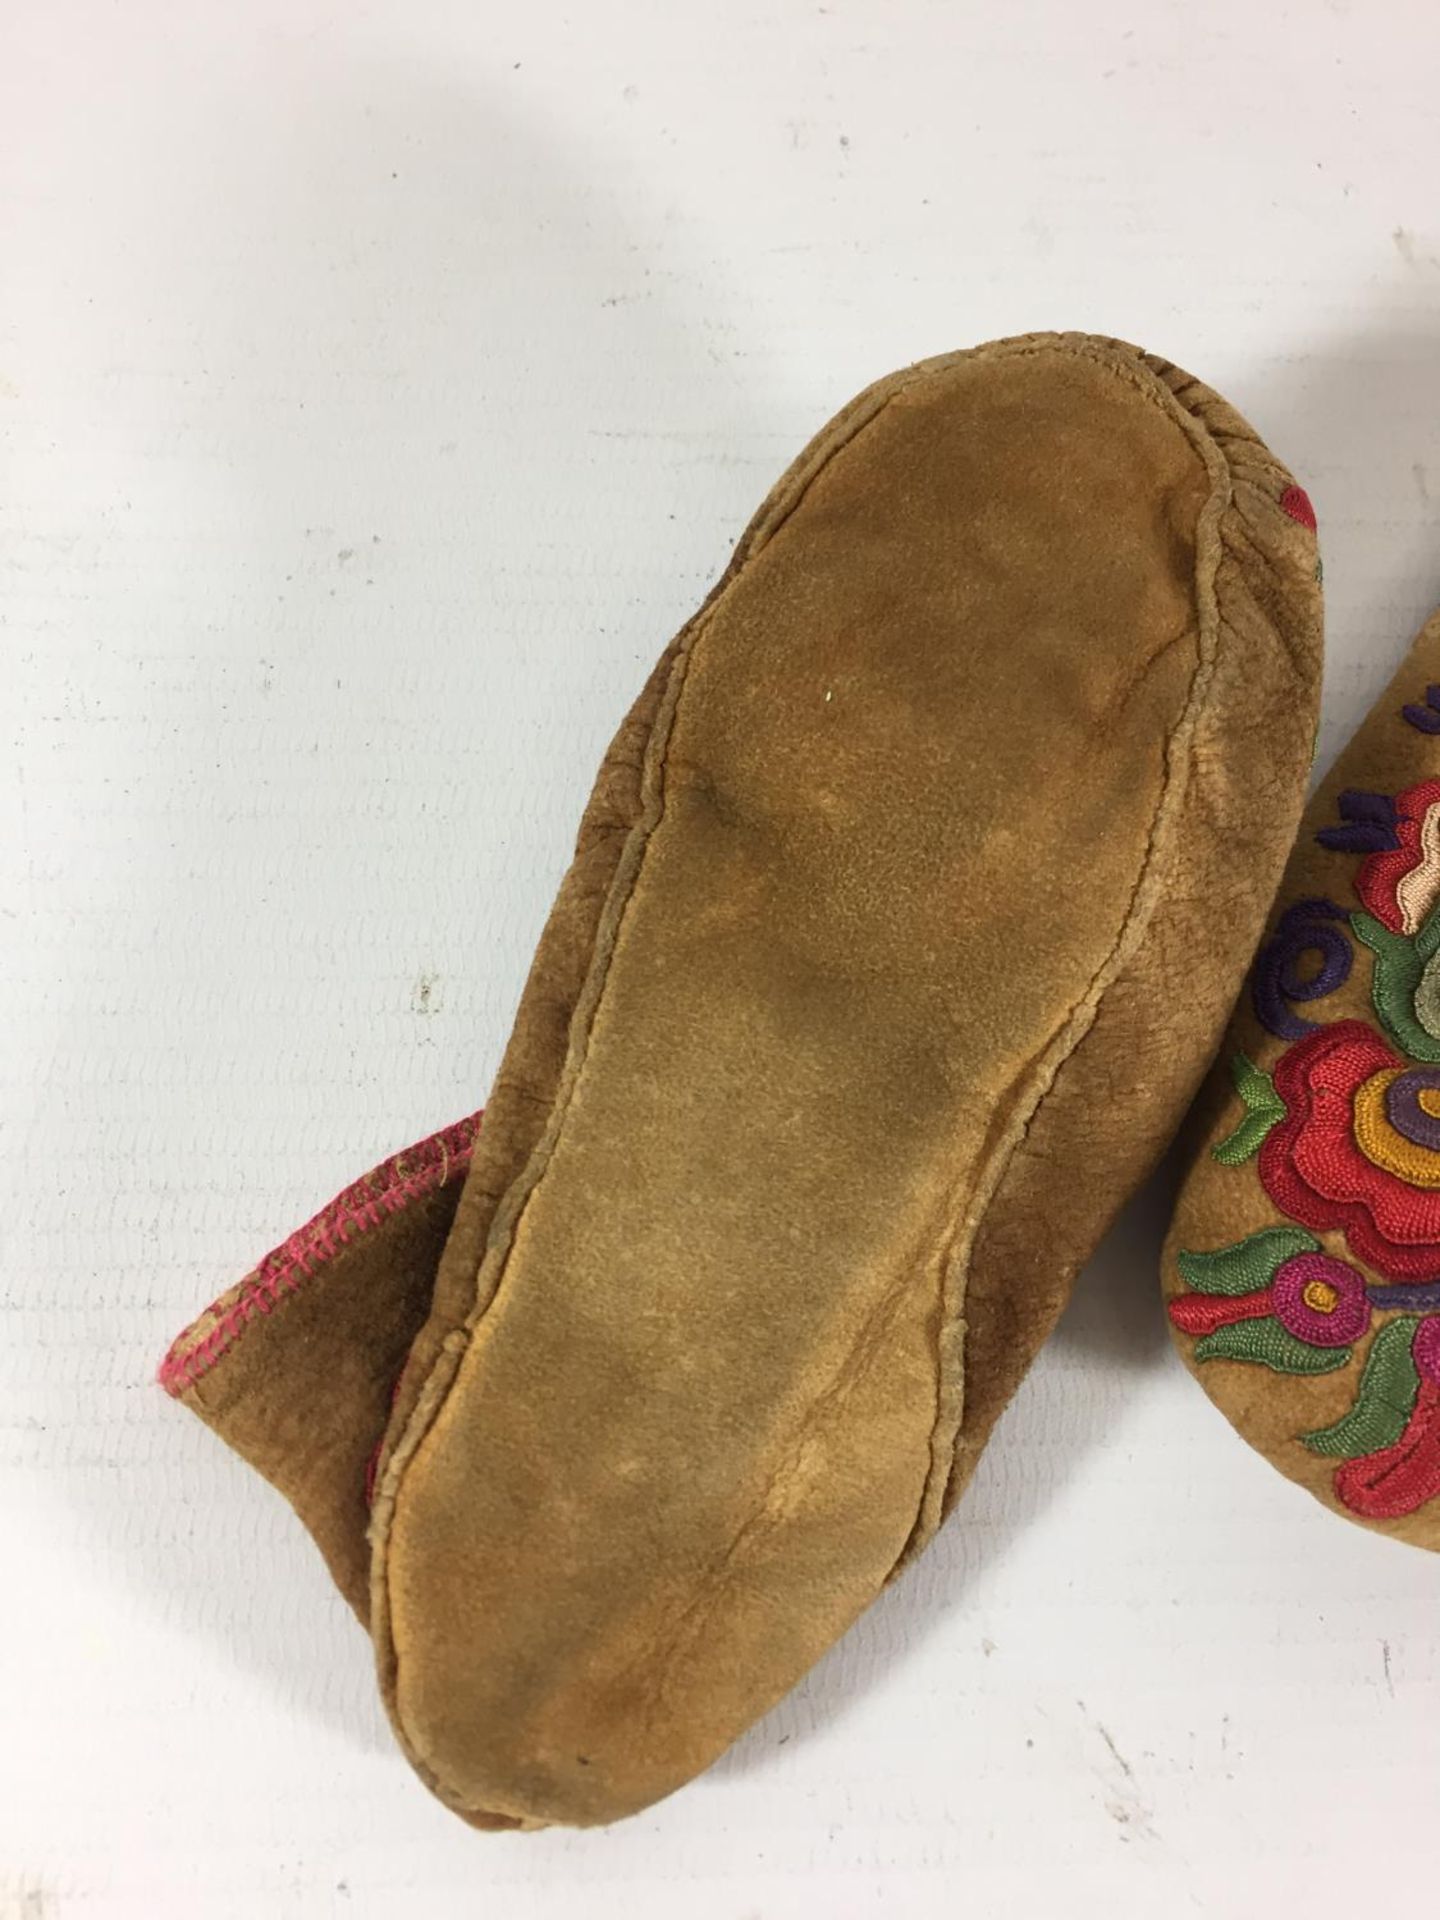 A PAIR OF EARLY TO MID 20TH CENTURY CANADIAN BABIES MOCCASINS, WITHHAND EMBROIDERED FLORAL - Image 4 of 4